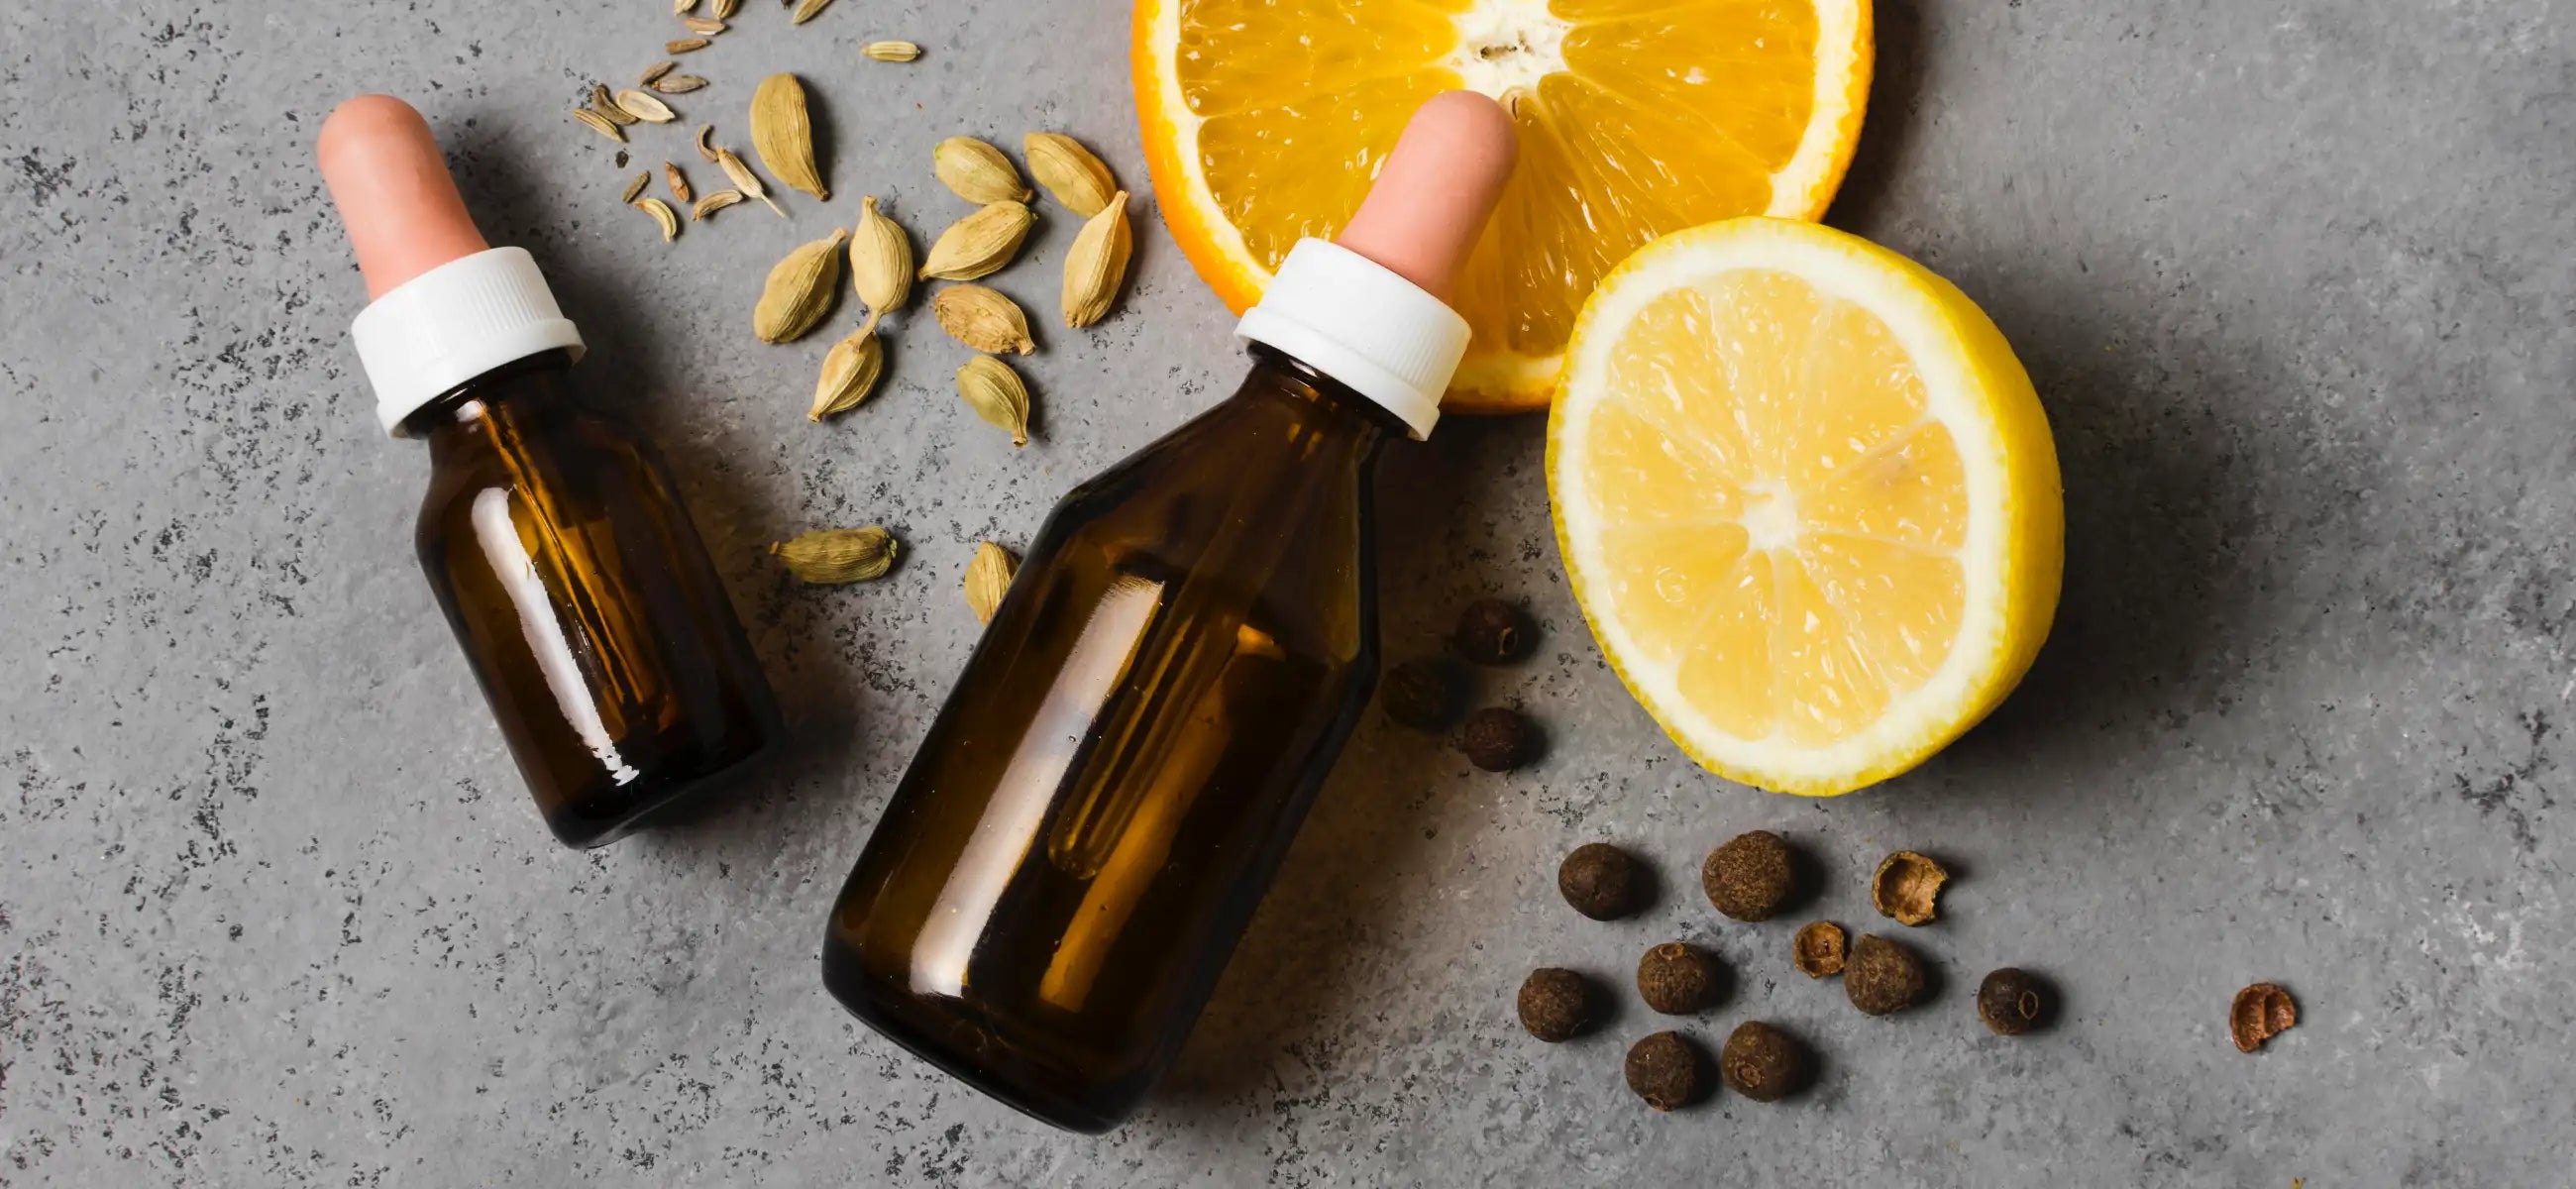 Holistic dental care: 5 of the best oils for tooth pain